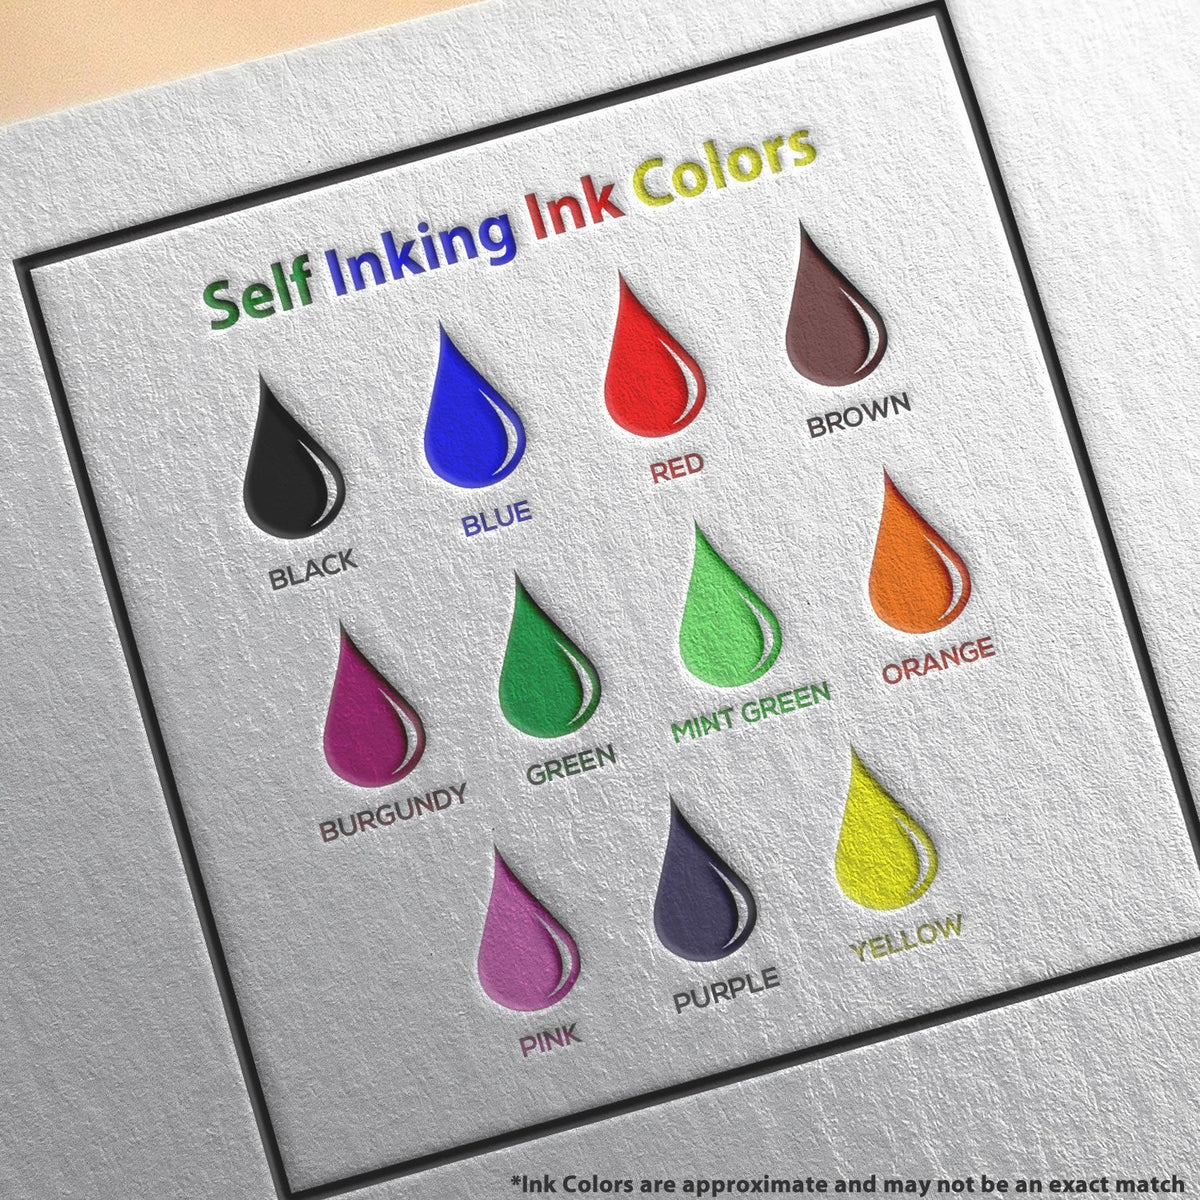 Self-Inking No Negociable Stamp Ink Color Options